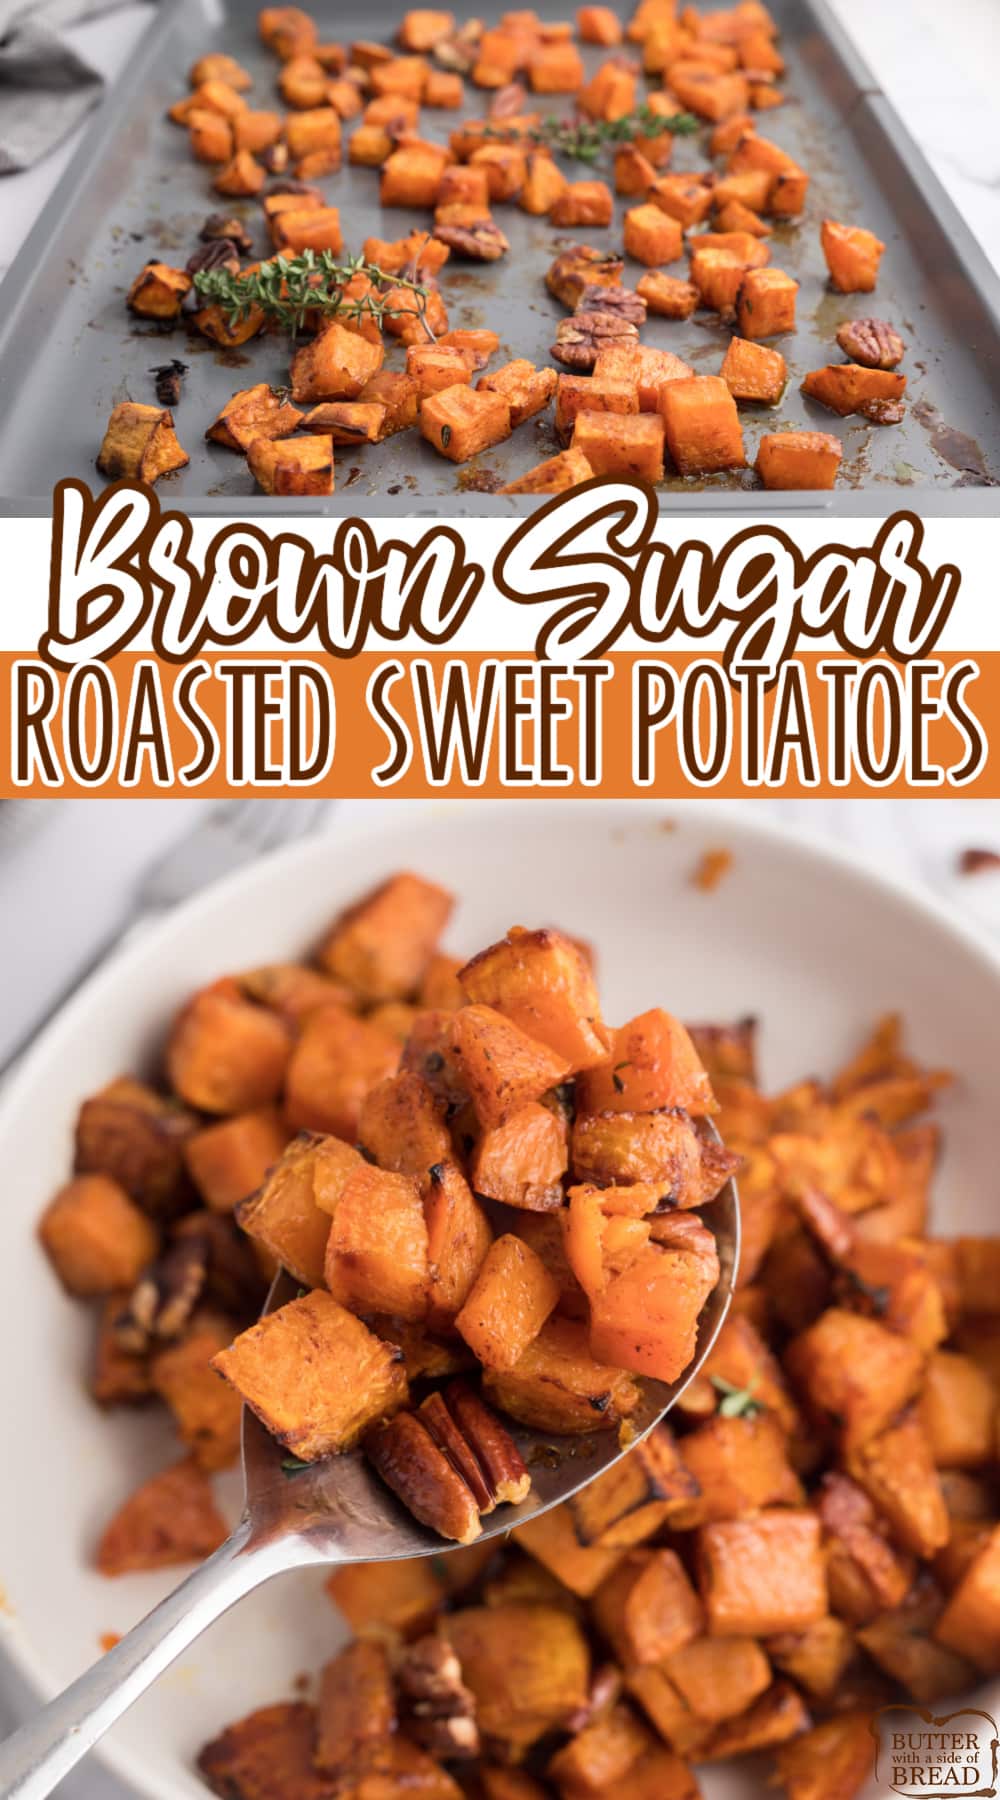 Brown Sugar Roasted Sweet Potatoes are a great side dish for any meal. Simple oven roasted sweet potato recipe made with brown sugar, cinnamon, thyme, butter and pecans.